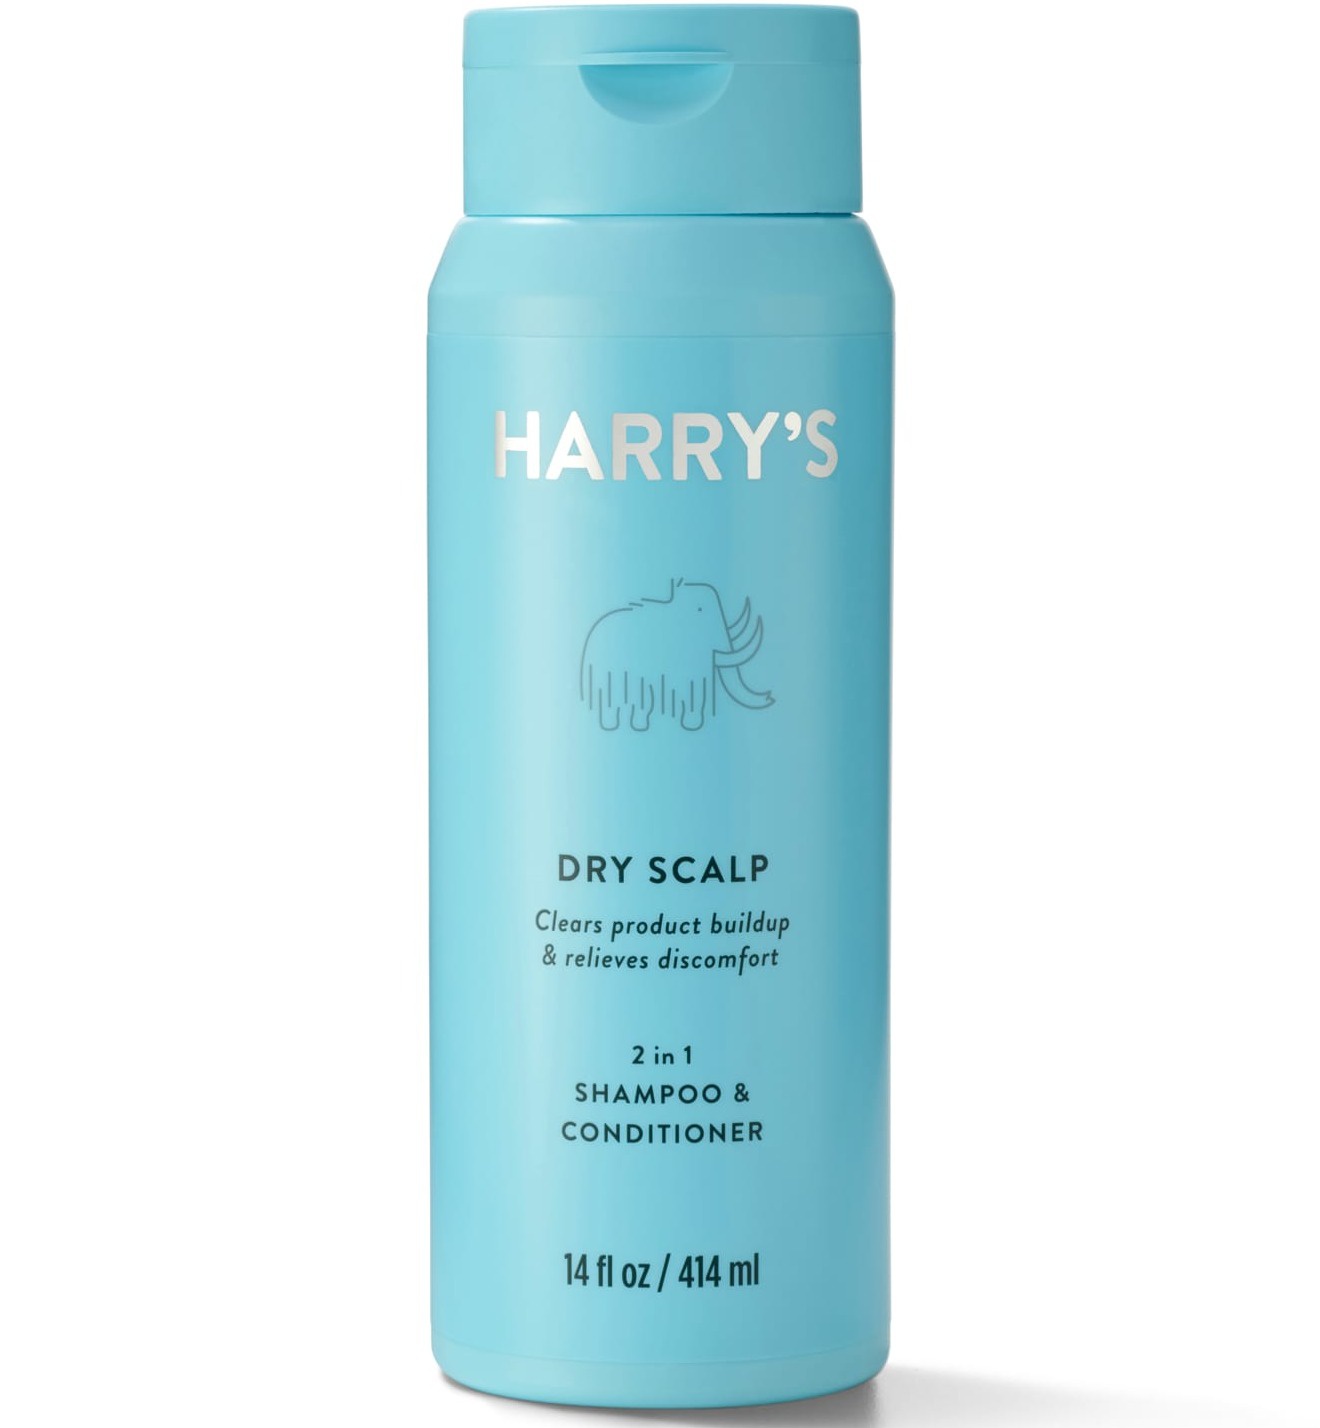 Harry’s Dry Scalp 2 In 1 Shampoo & Conditioner